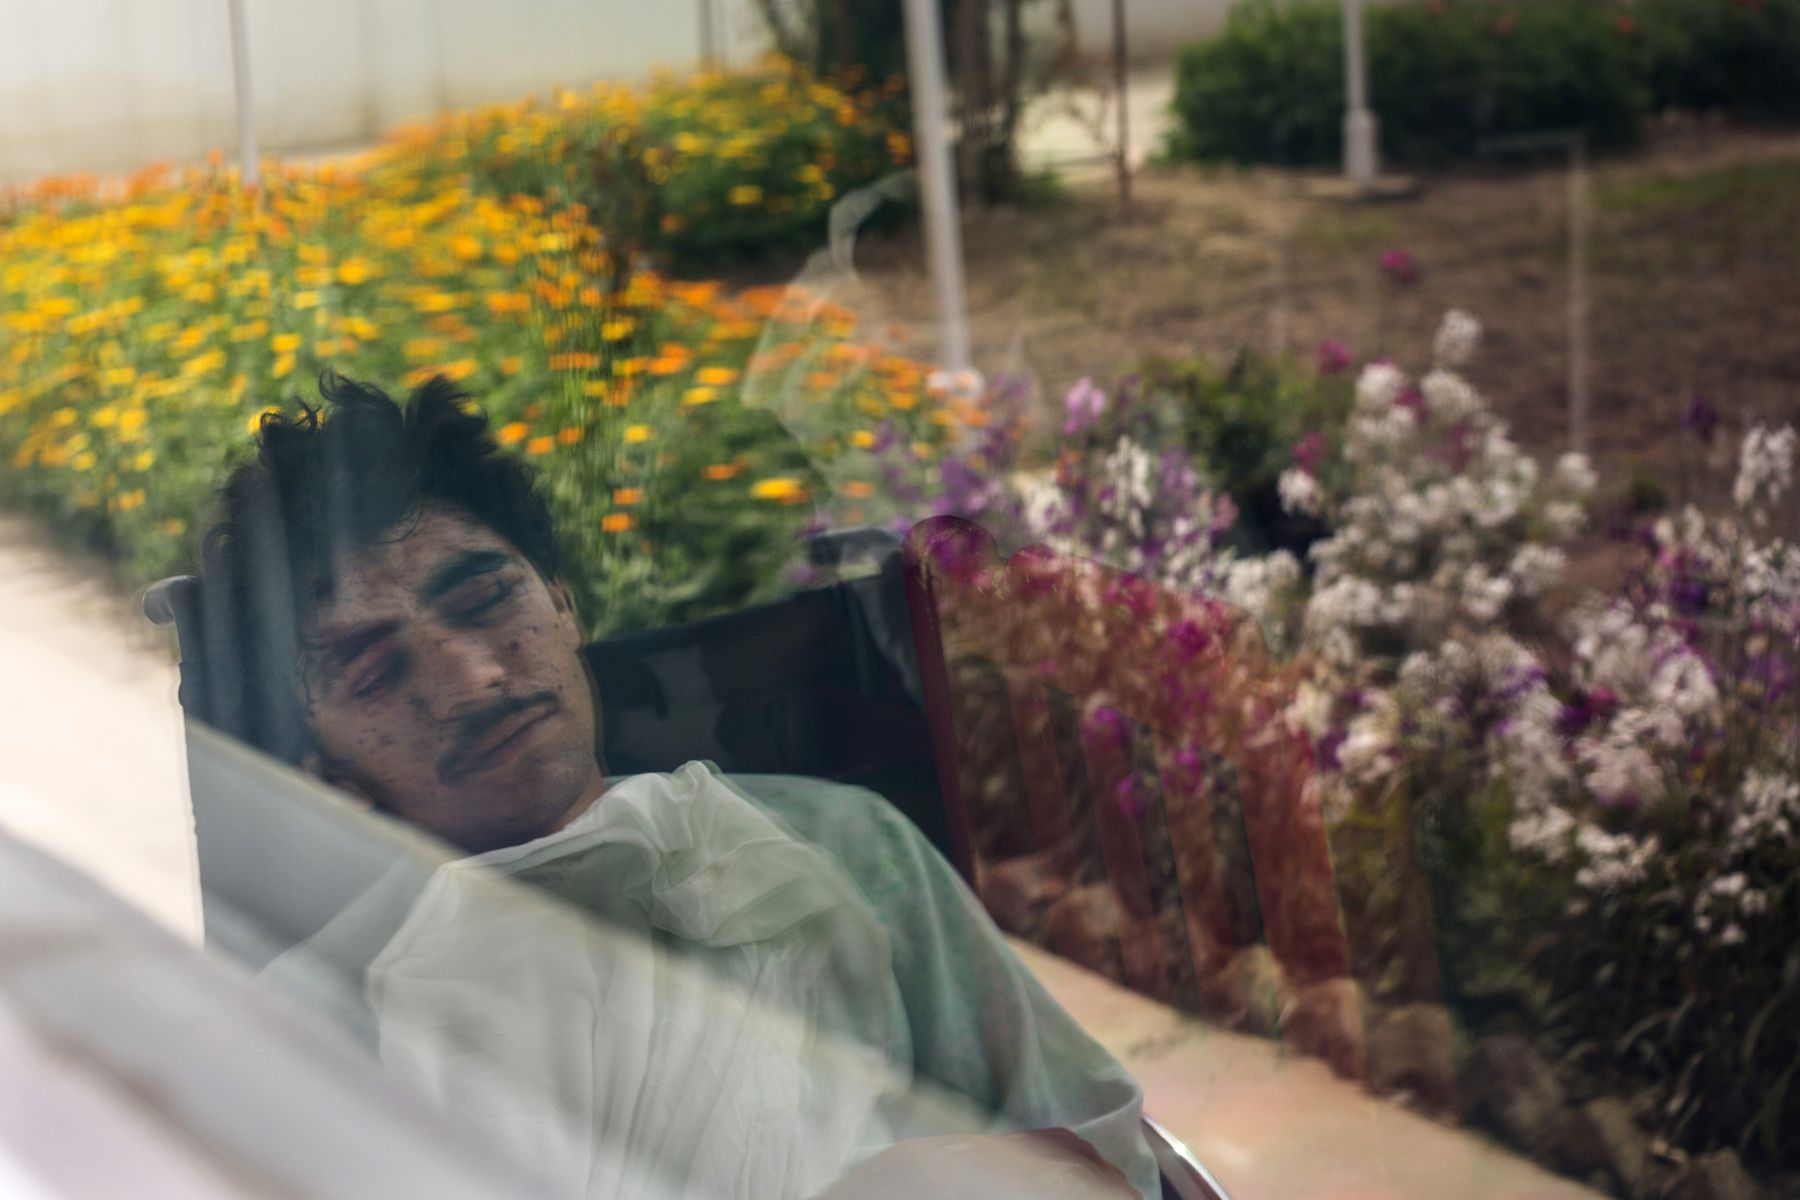 Kharim Ahmad, 22, suffered shrapnel wounds on his face and the loss of a leg from fighting in Sangin. He was being treated at the Emergency hospital in Lashkar Gah, Afghanistan. Image by Paula Bronstein. Afghanistan, 2015.